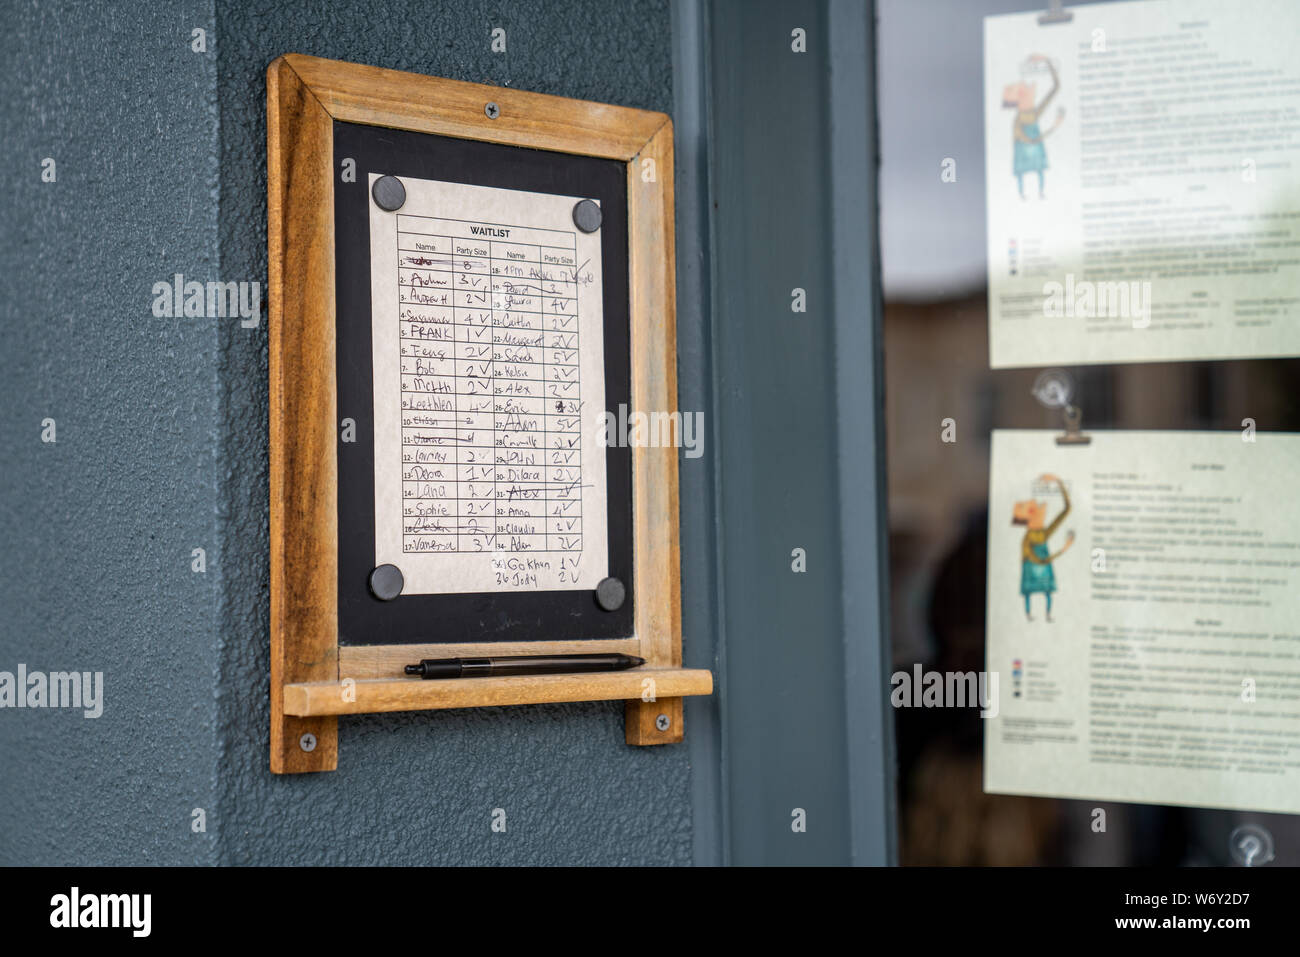 Waitlist filled out with names at popular restaurant next to menus Stock Photo